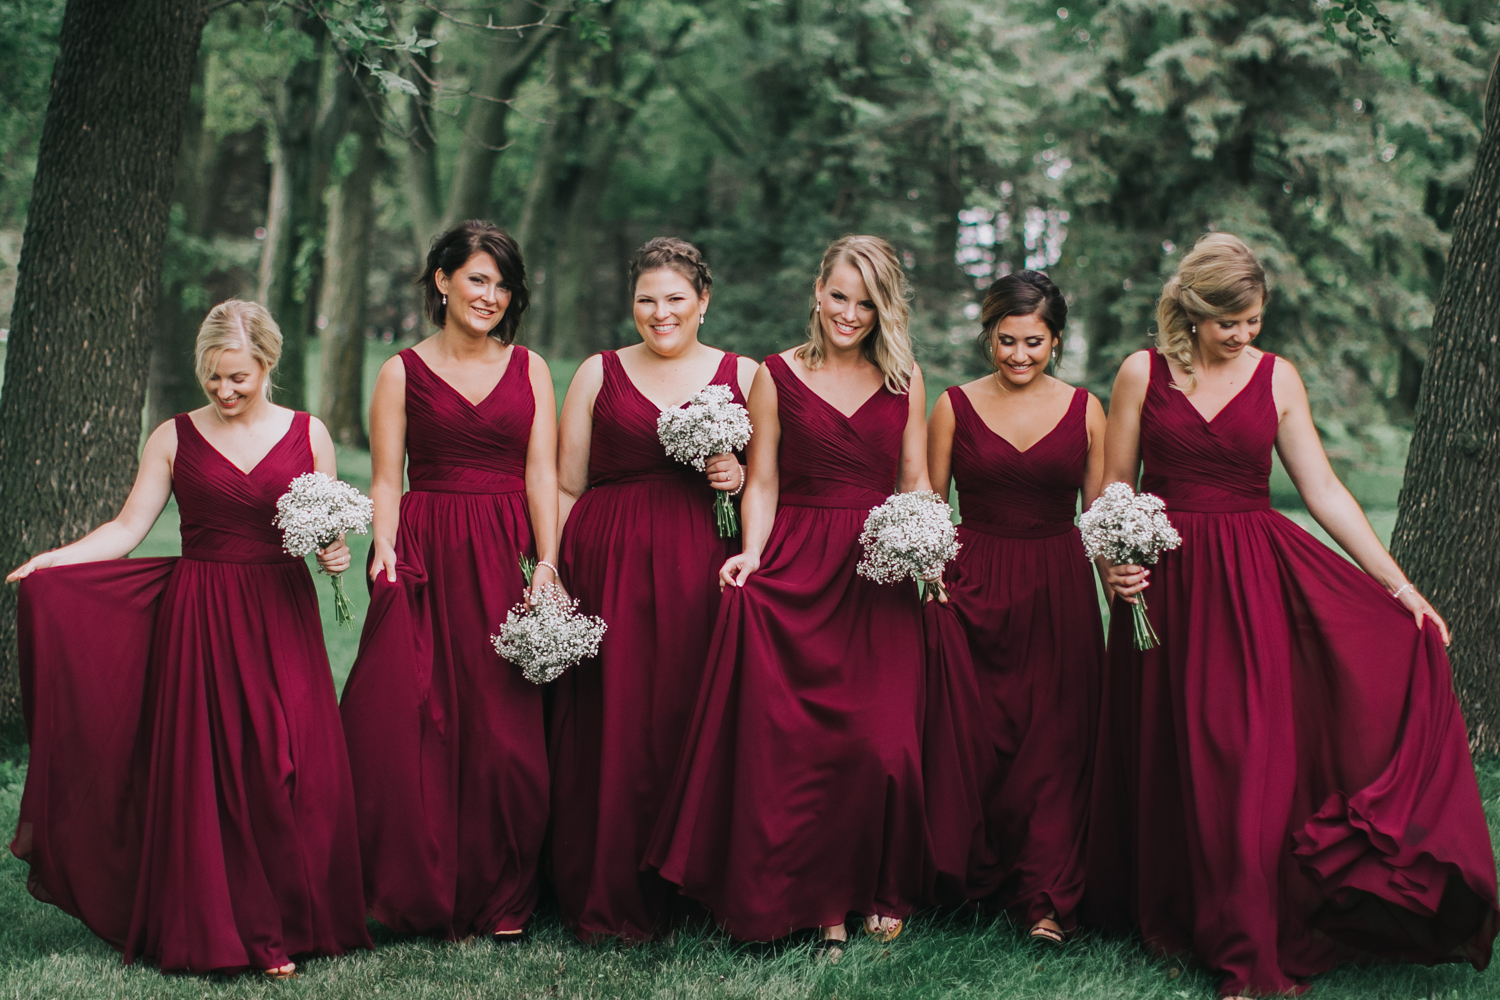 How to Choose Your Bridesmaids | Emily Mitton